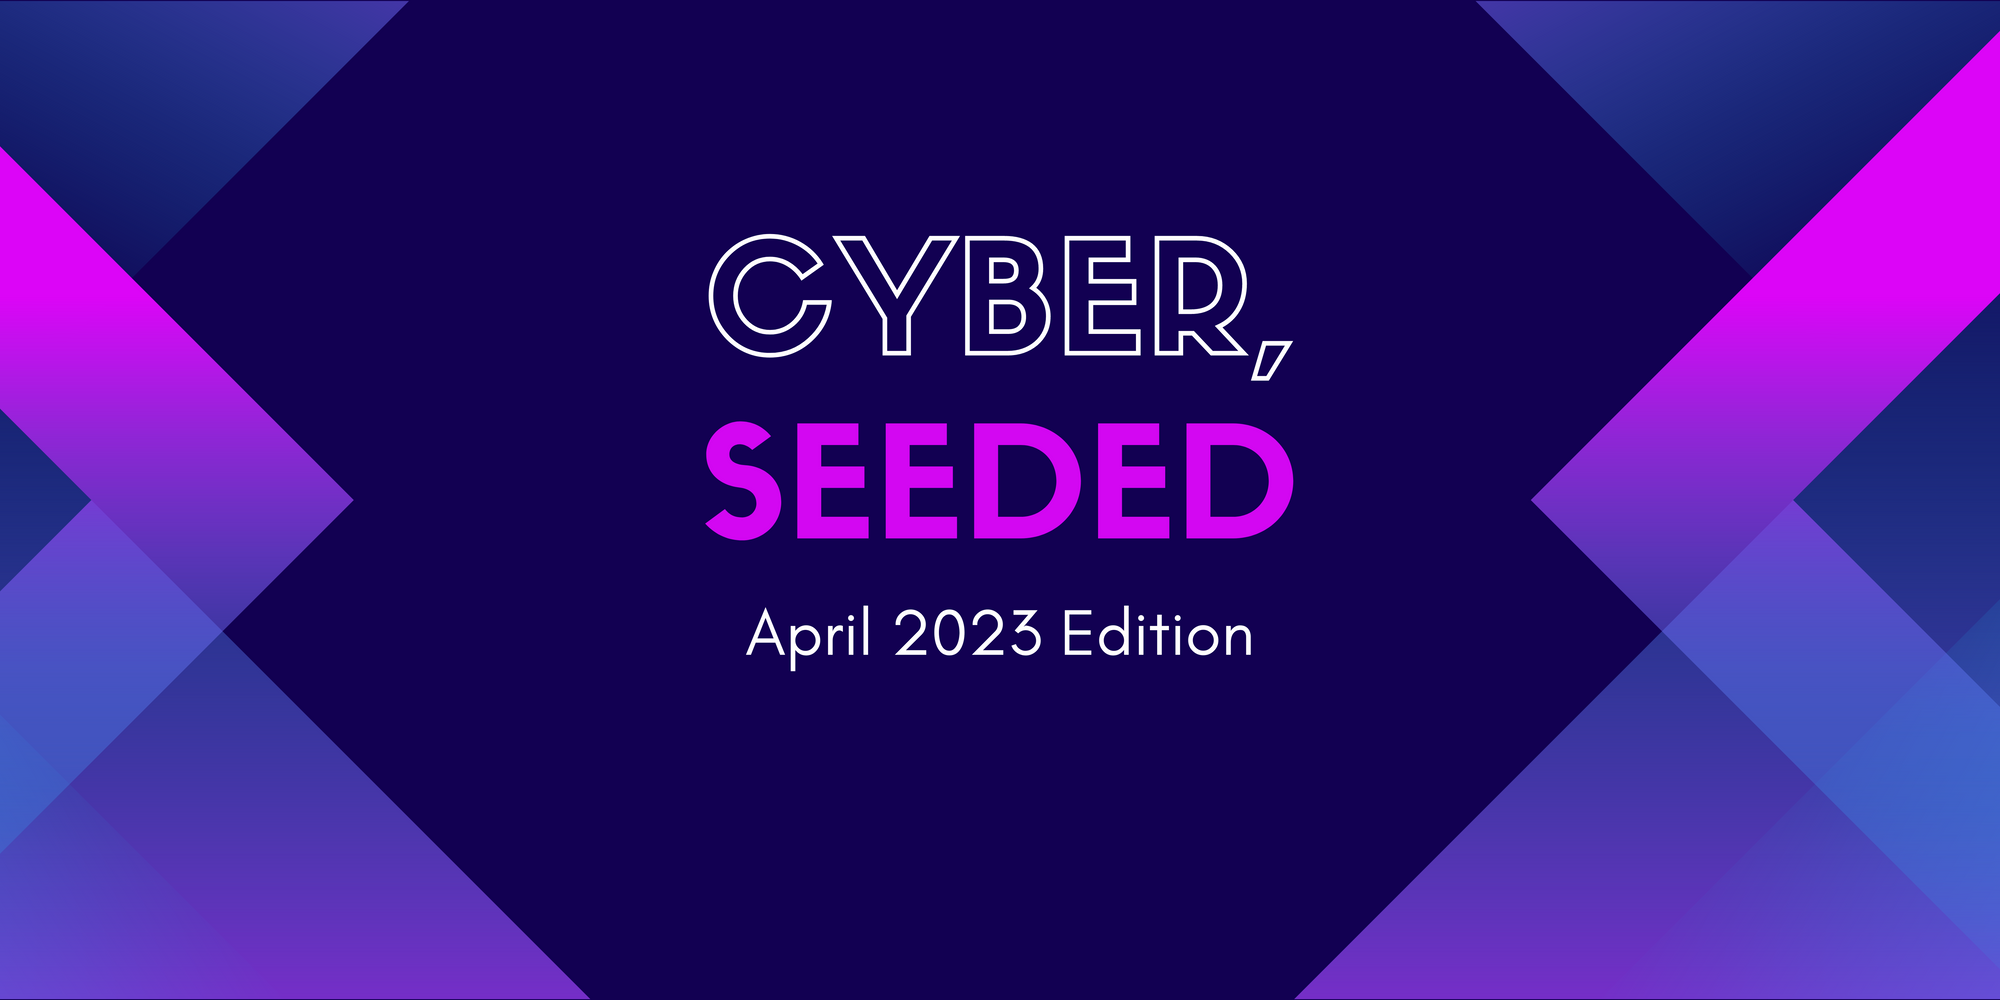 Cyber, Seeded #1 April 2023 Edition